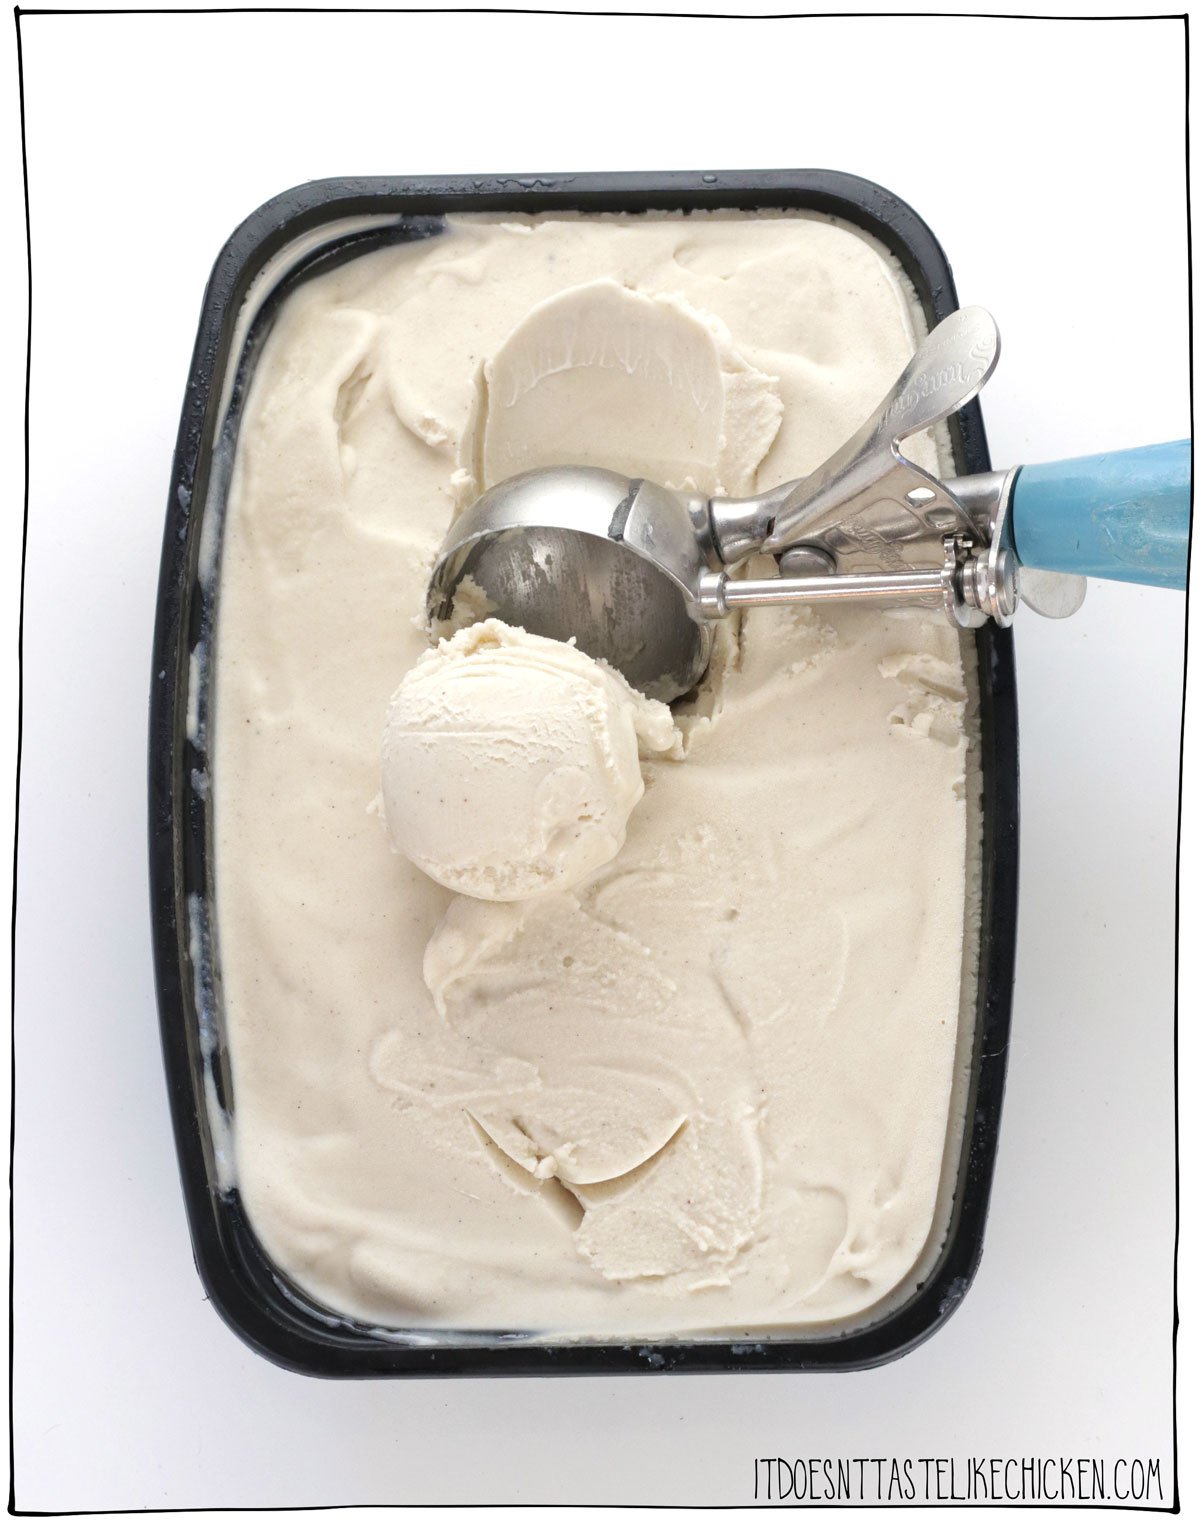 Just 4 ingredients to make the BEST vegan vanilla ice cream! This homemade ice cream recipe is easy to make, super rich and creamy- it's the best ice cream I've ever tasted, vegan or not! #itdoesnttastelikechicken #vegan 